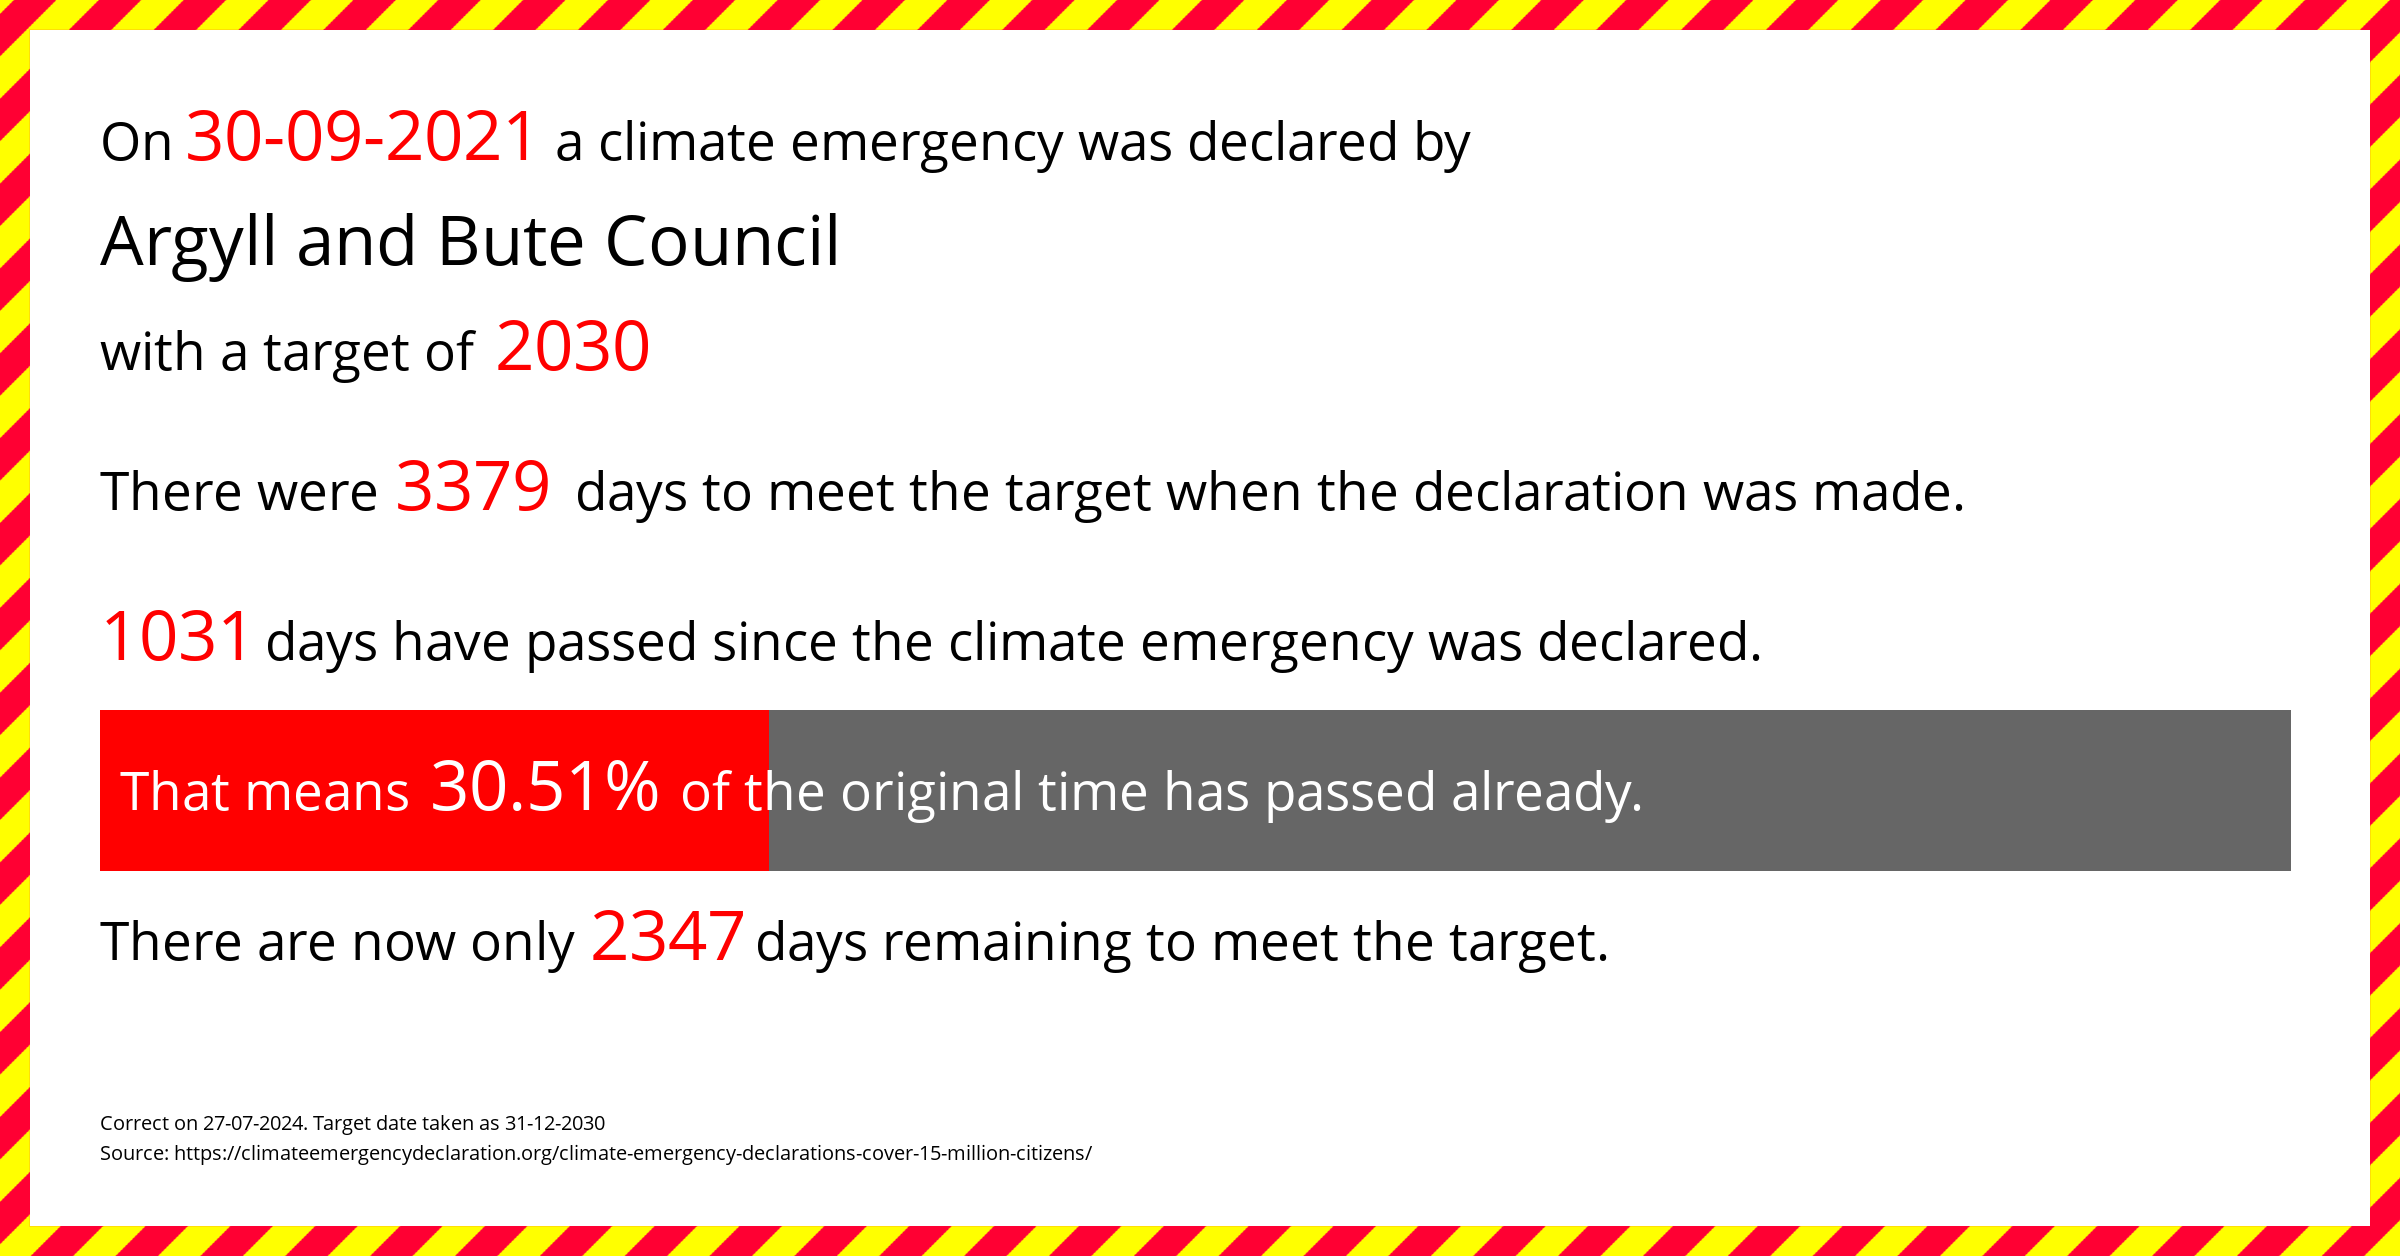 Argyll and Bute Council  declared a Climate emergency on Thursday 30th September 2021, with a target of 2030.